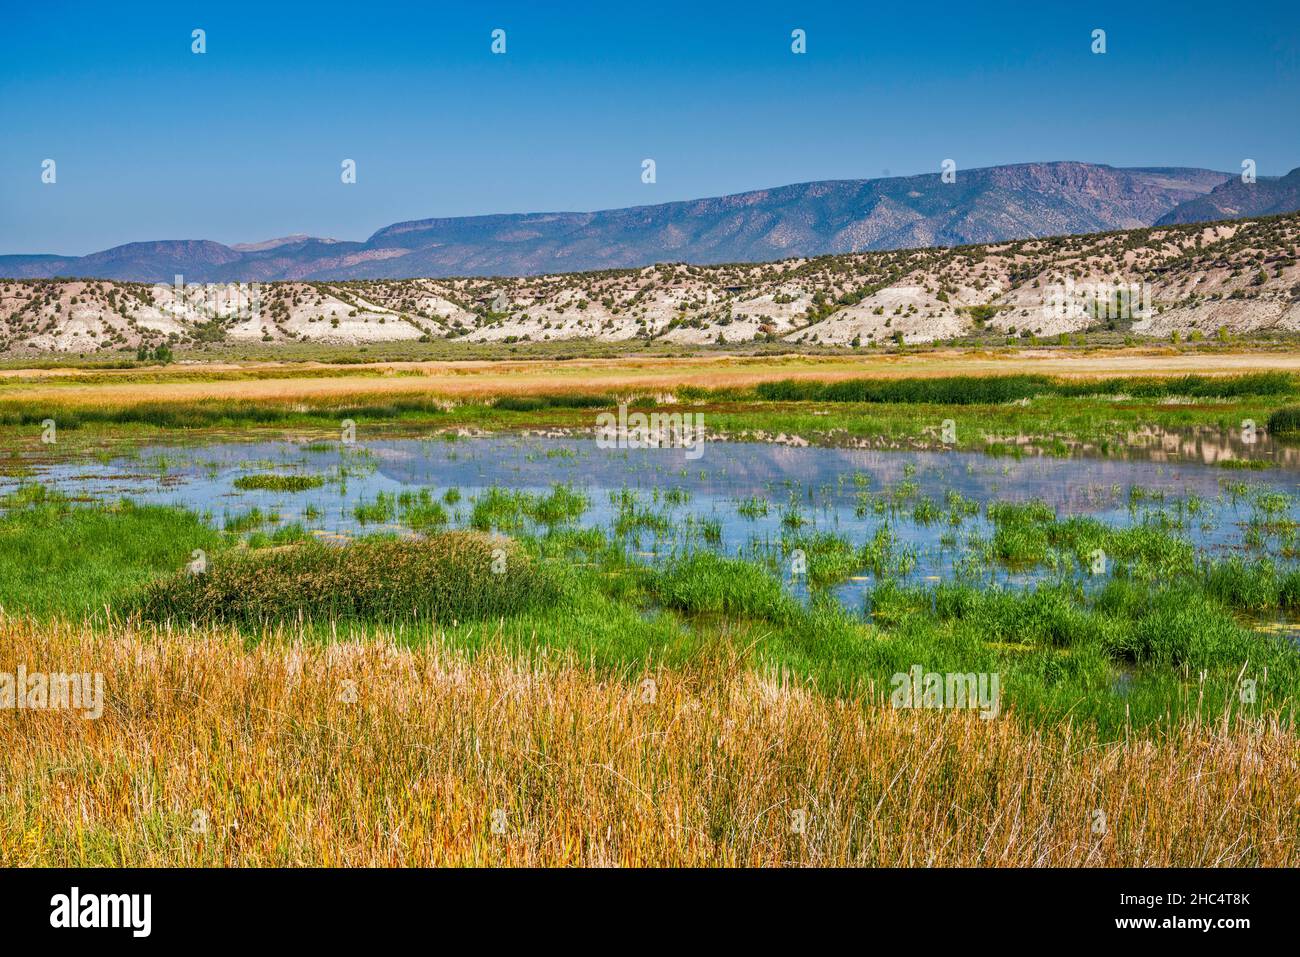 Browns Park Waterfowl Area, Green River overflow area, freshwater swamp, O-Wi-Yu-Kuts mountains in distance, Utah, USA Stock Photo